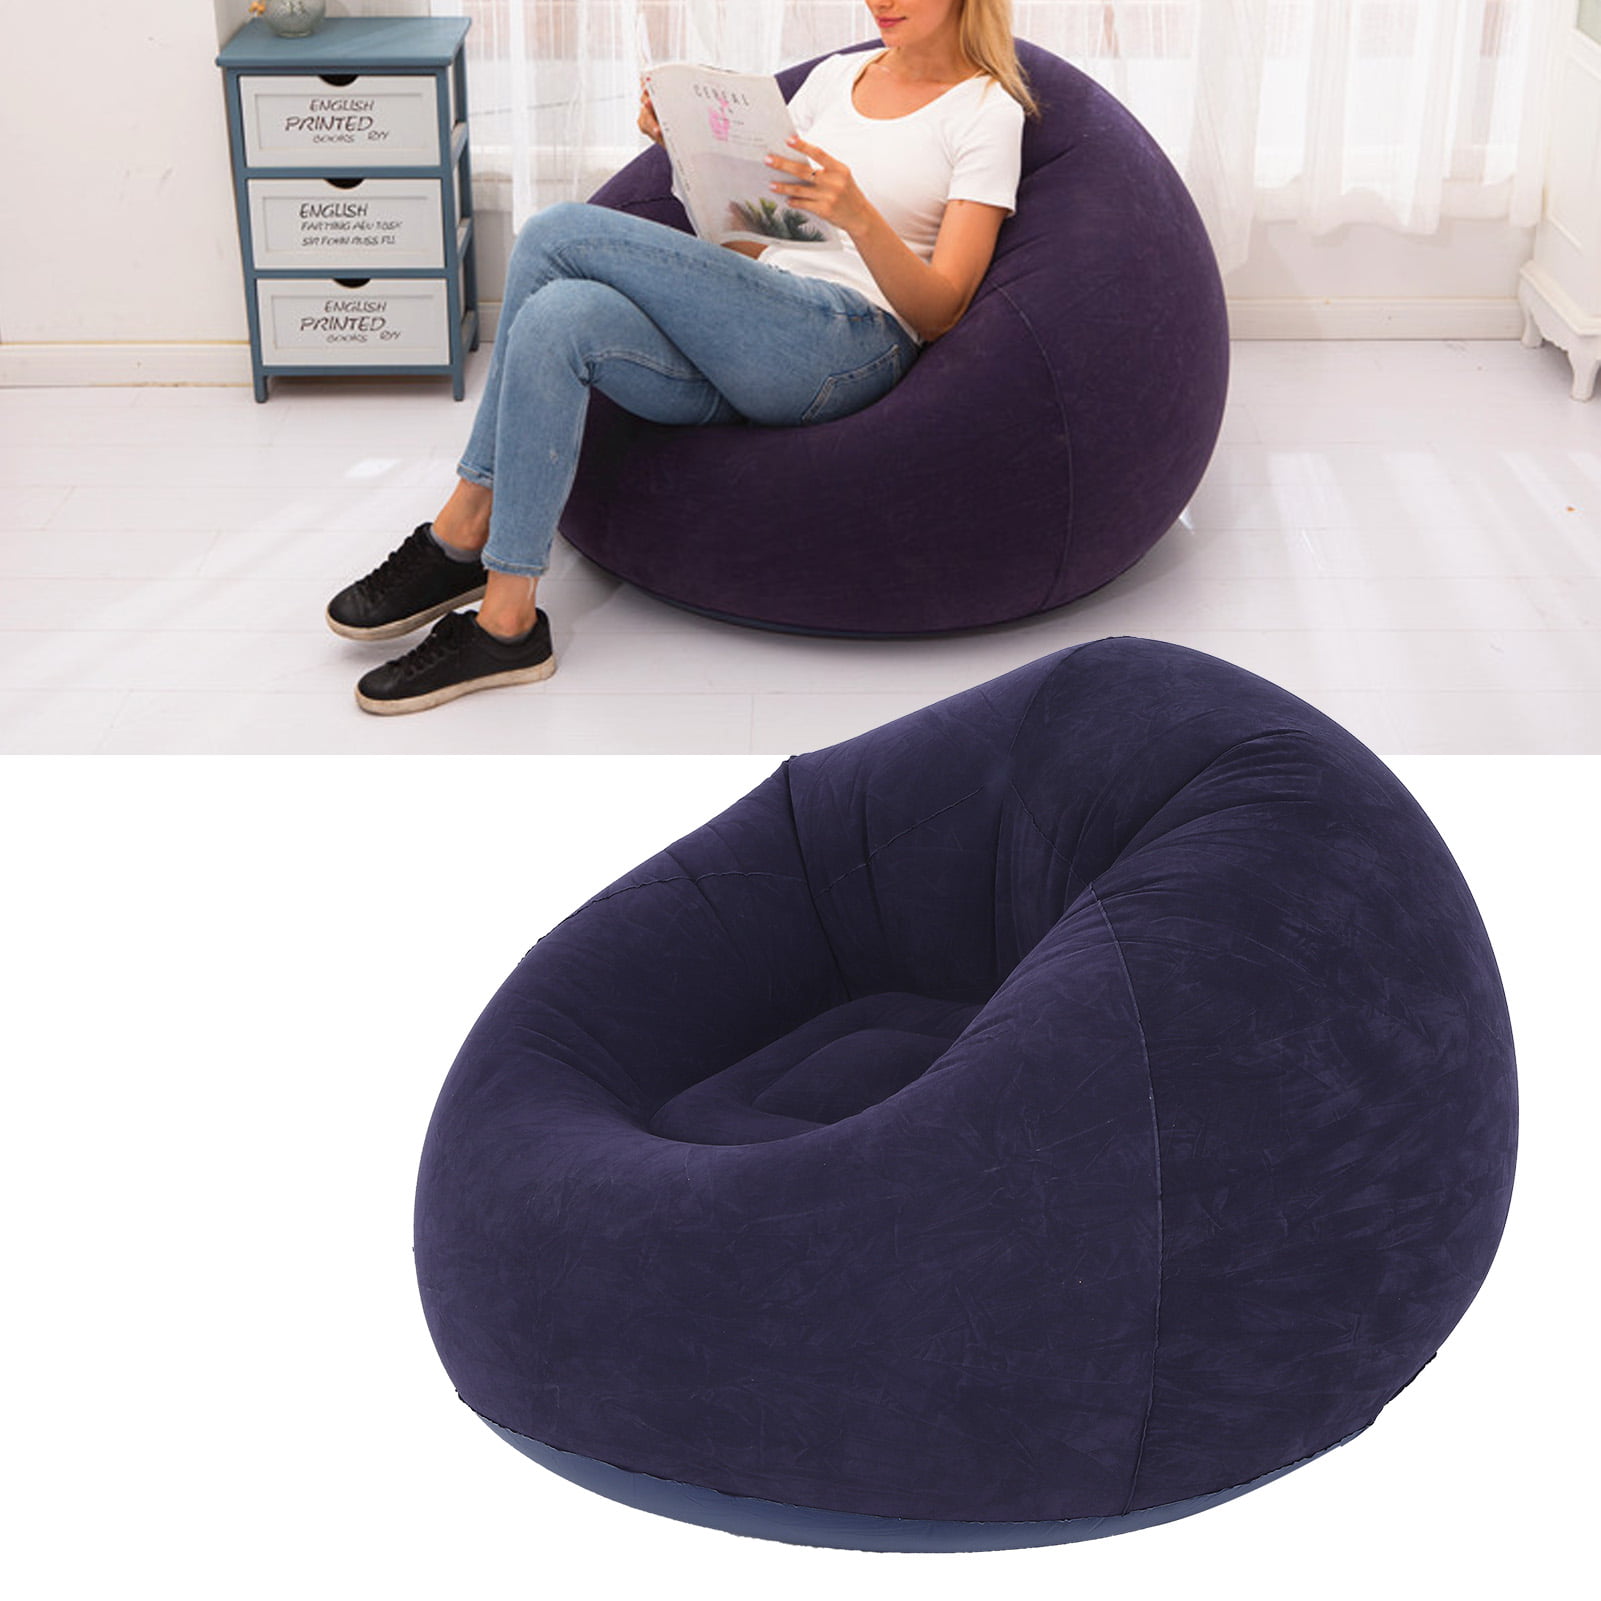 A sixx Inflatable Sofa Portable Foldable Ultra Soft Inflatable Single Spherical Leisure Sofa Chair for Home Living Room Courtyard Travel Camping 